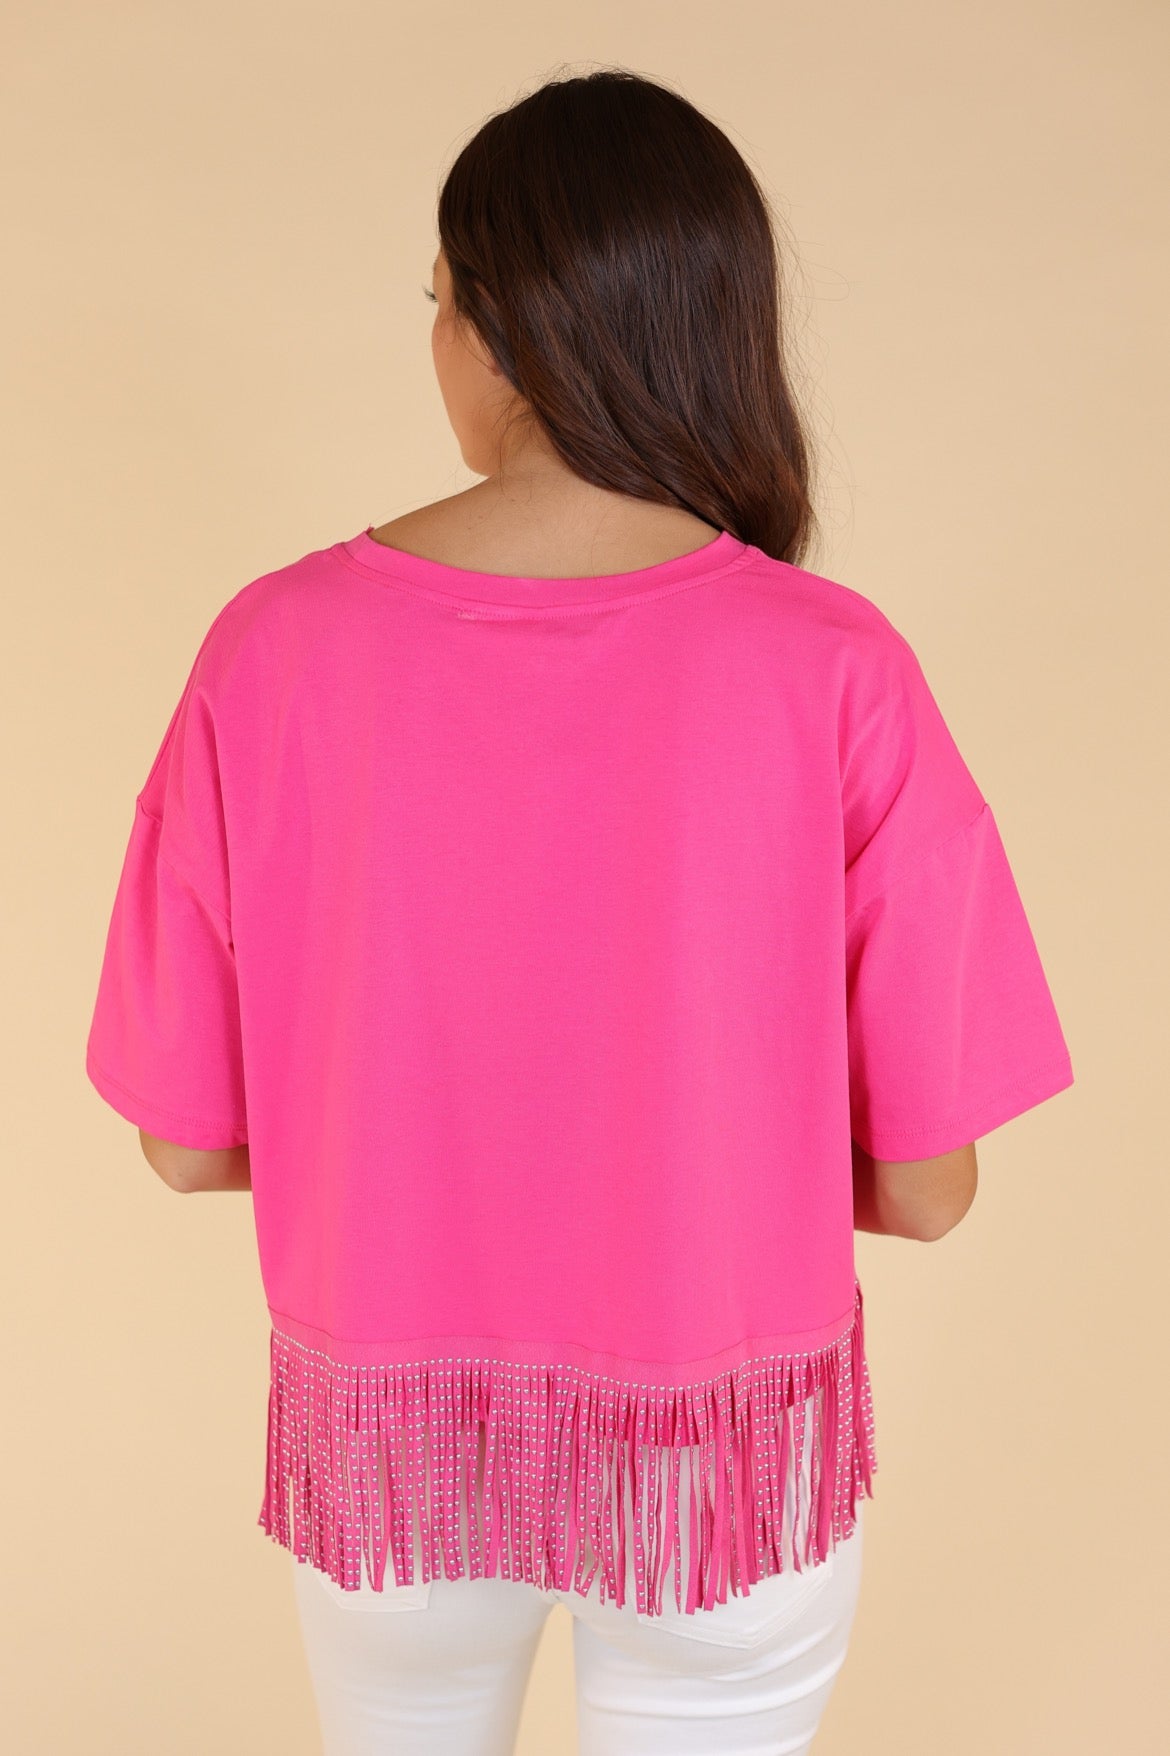 Here for the Show Studded Fringe Crop Top in Hot Pink